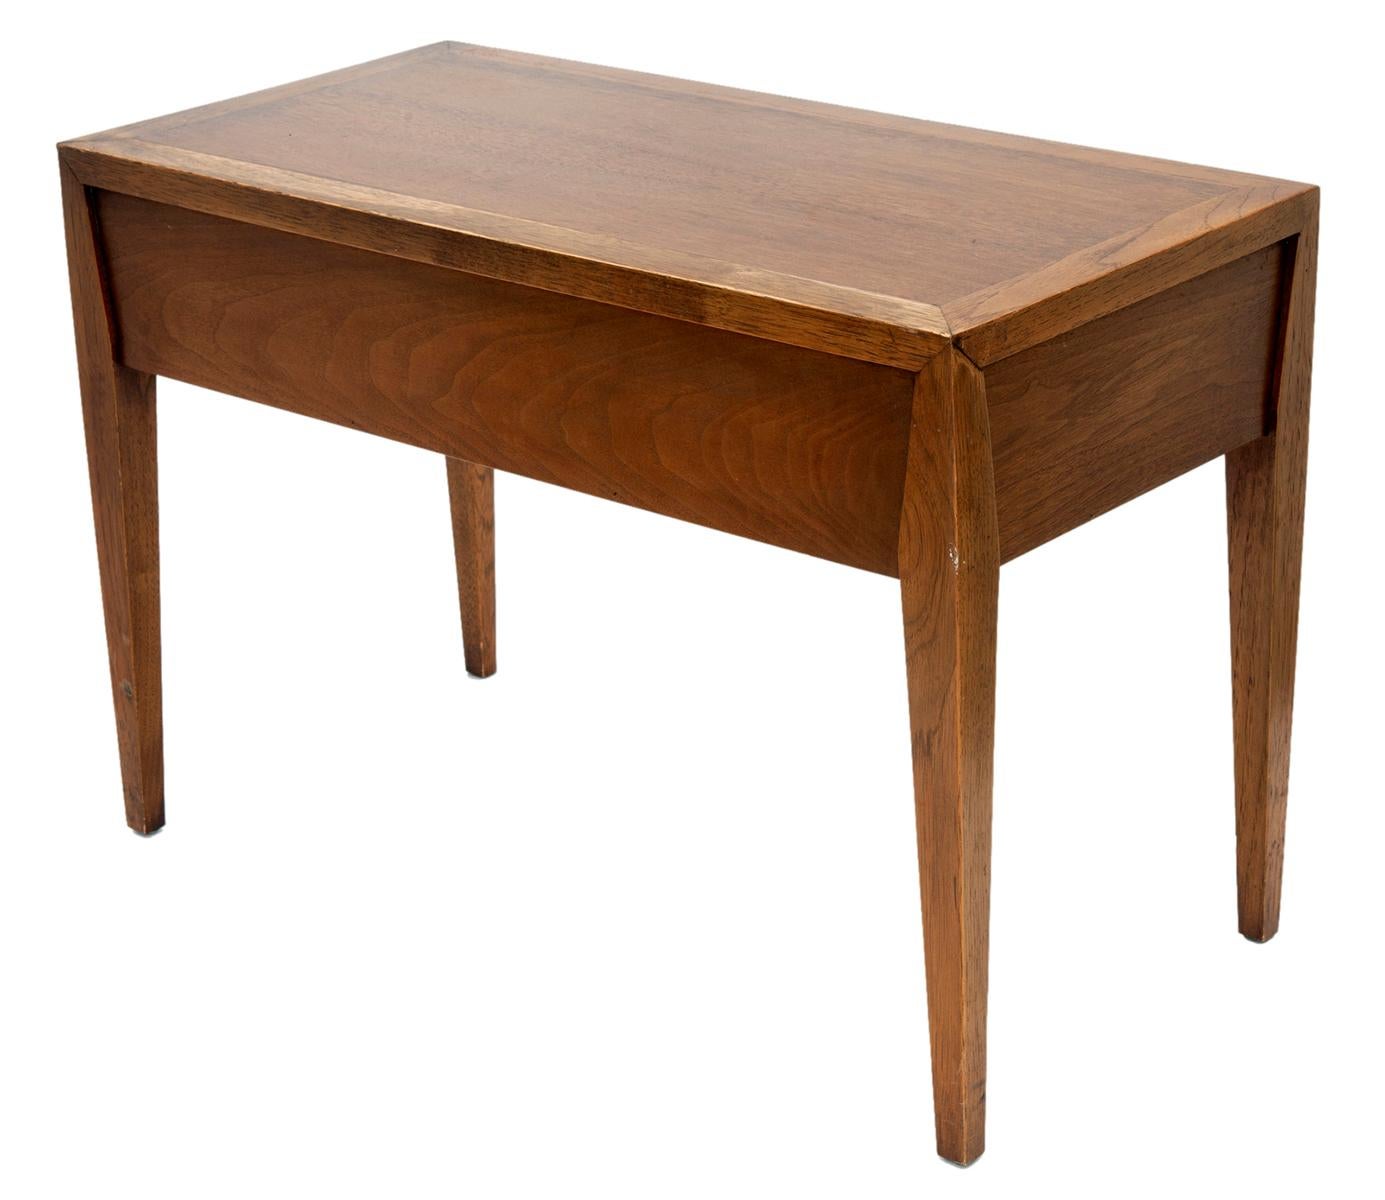 Mid-20th Century Midcentury Walnut Table with Wicker Drawer by Century For Sale